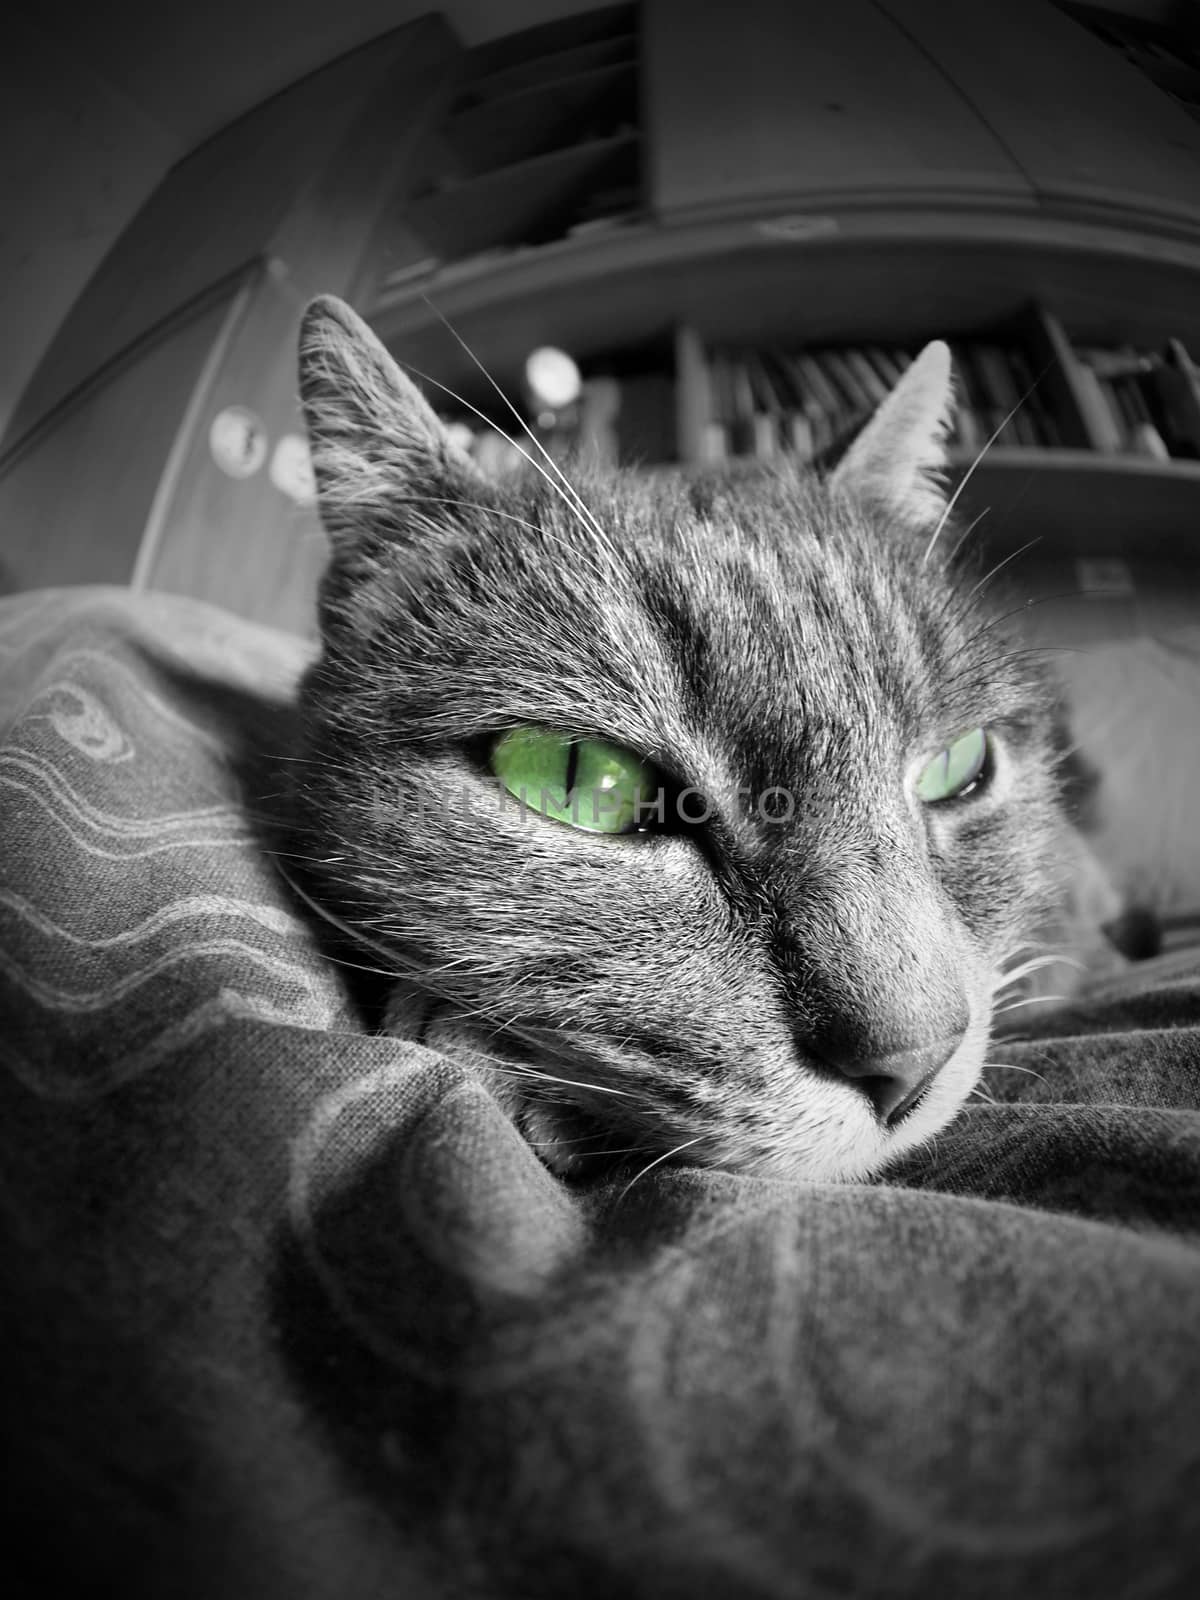 black and white cat portrait with green eyes by sette